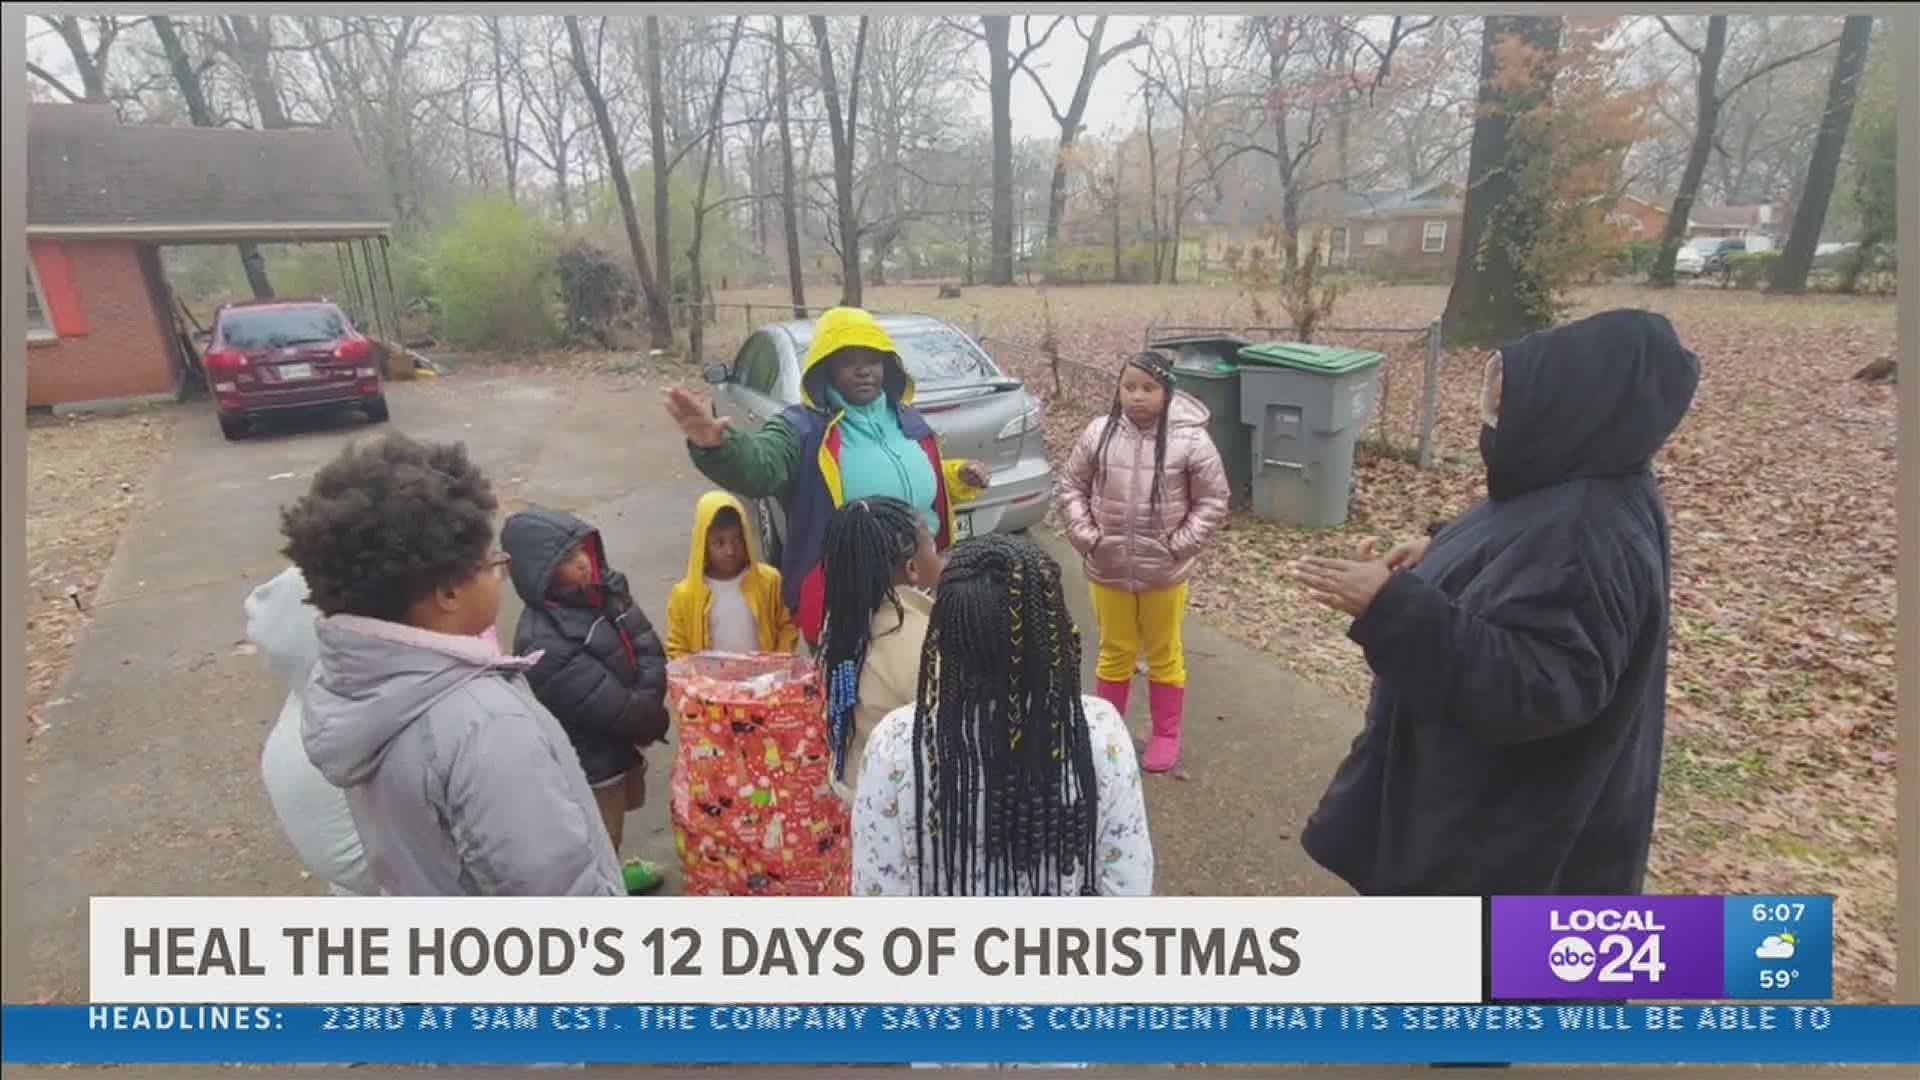 “The families have been overjoyed. There’s been a lot of tears. There’s been a lot of smiles," said LaDell Beamon, Heal the Hood Foundation CEO.